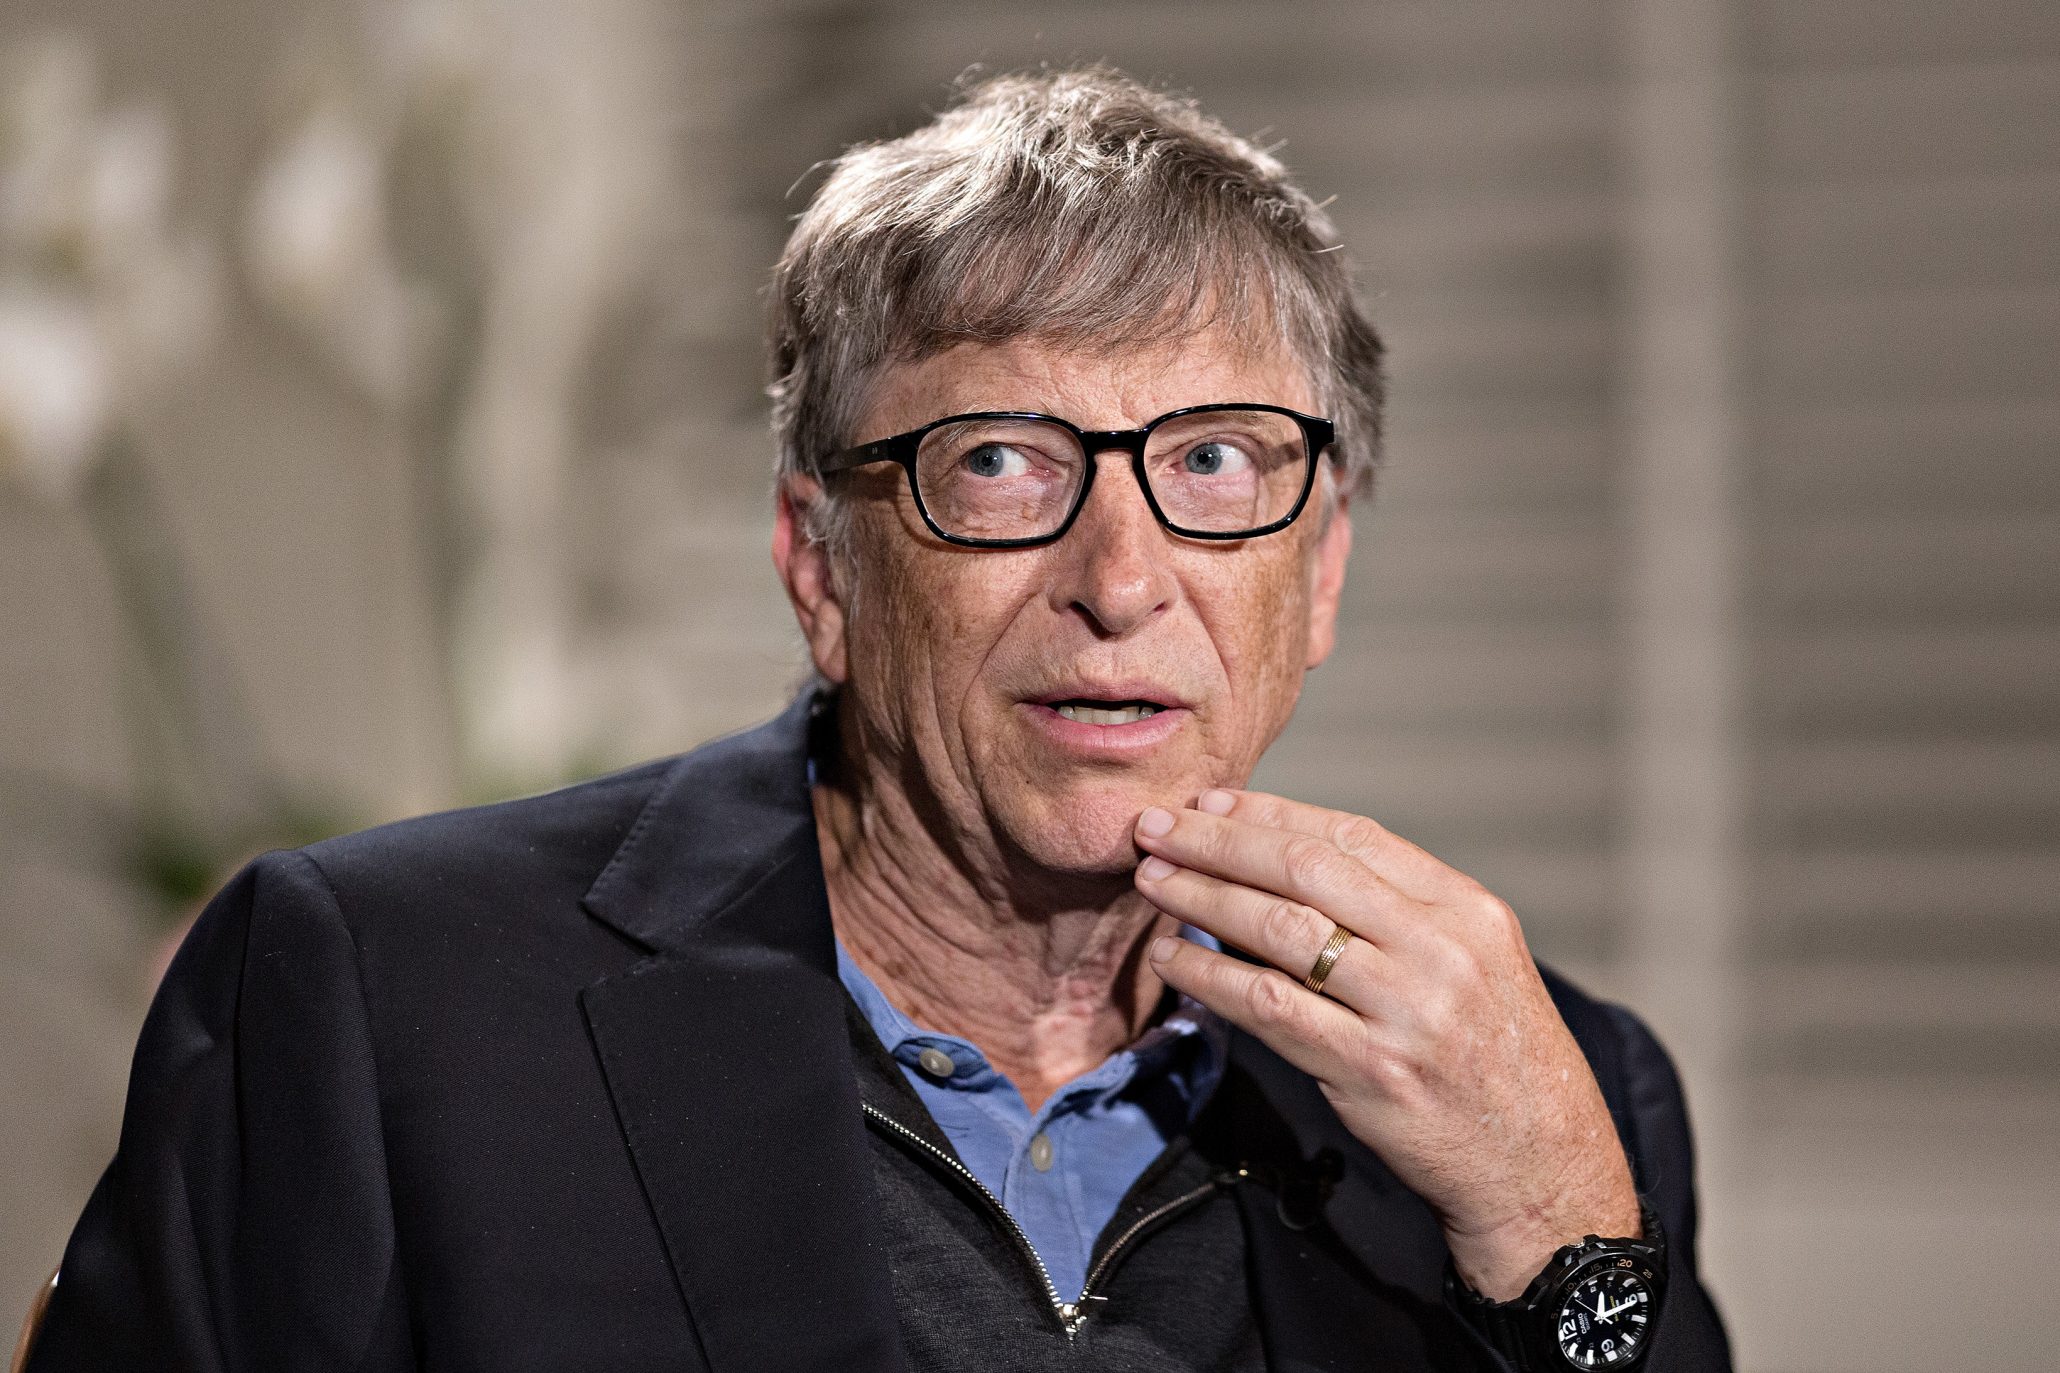 Risk of Covid reduced another pandemic says Bill Gates